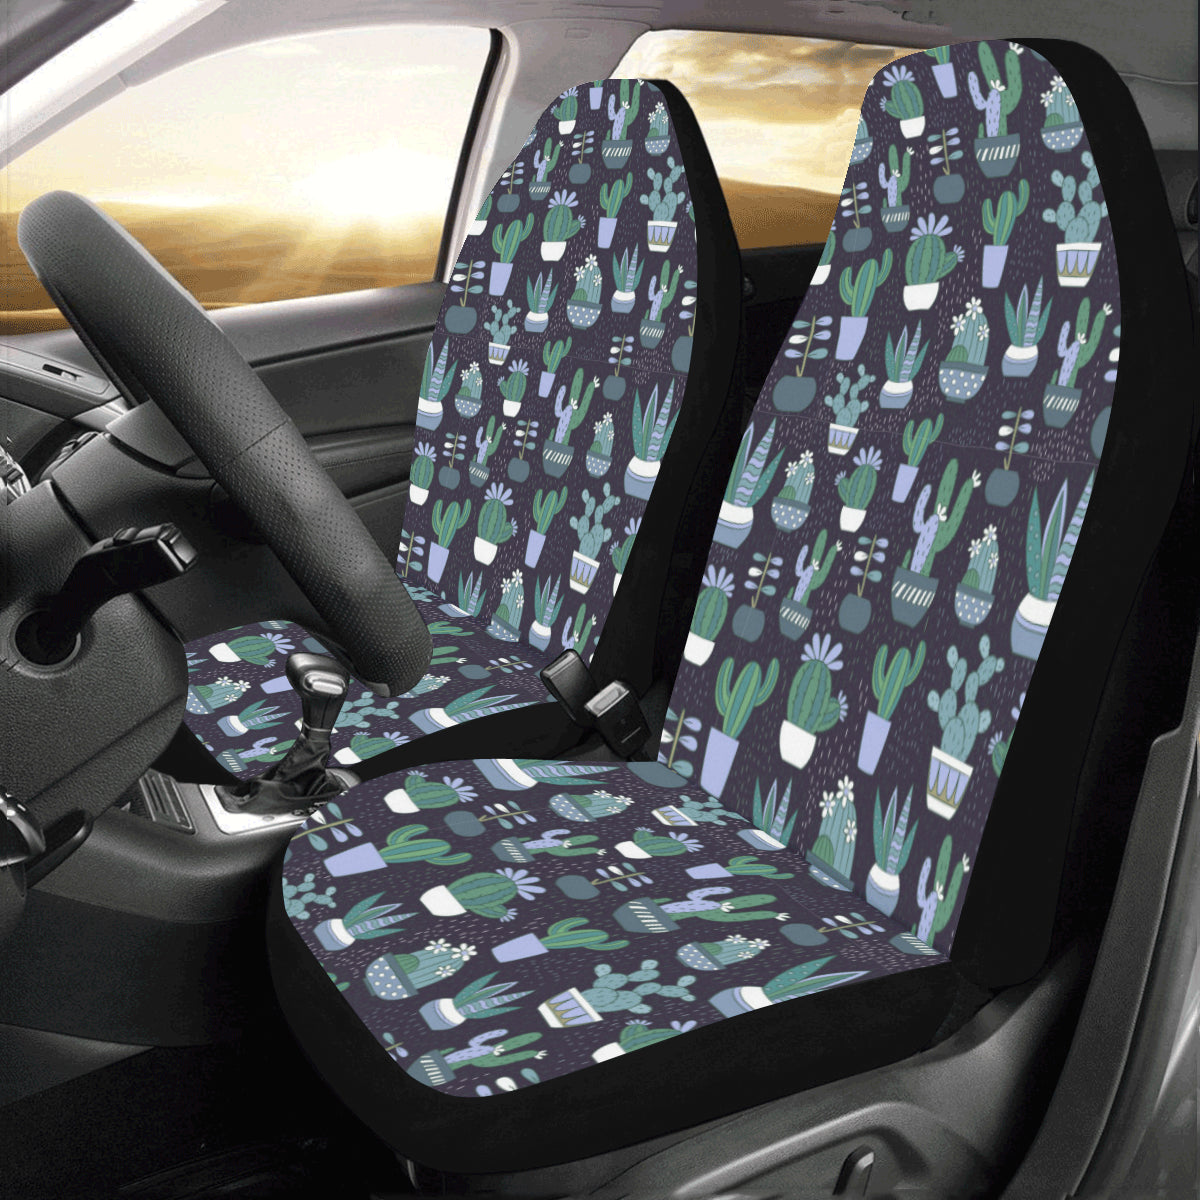 Cactus Flower Car Seat Covers 2 pc, Blue Green Mexican Floral Succulent Front Seat Covers, Car SUV Seat Protector Accessory Starcove Fashion